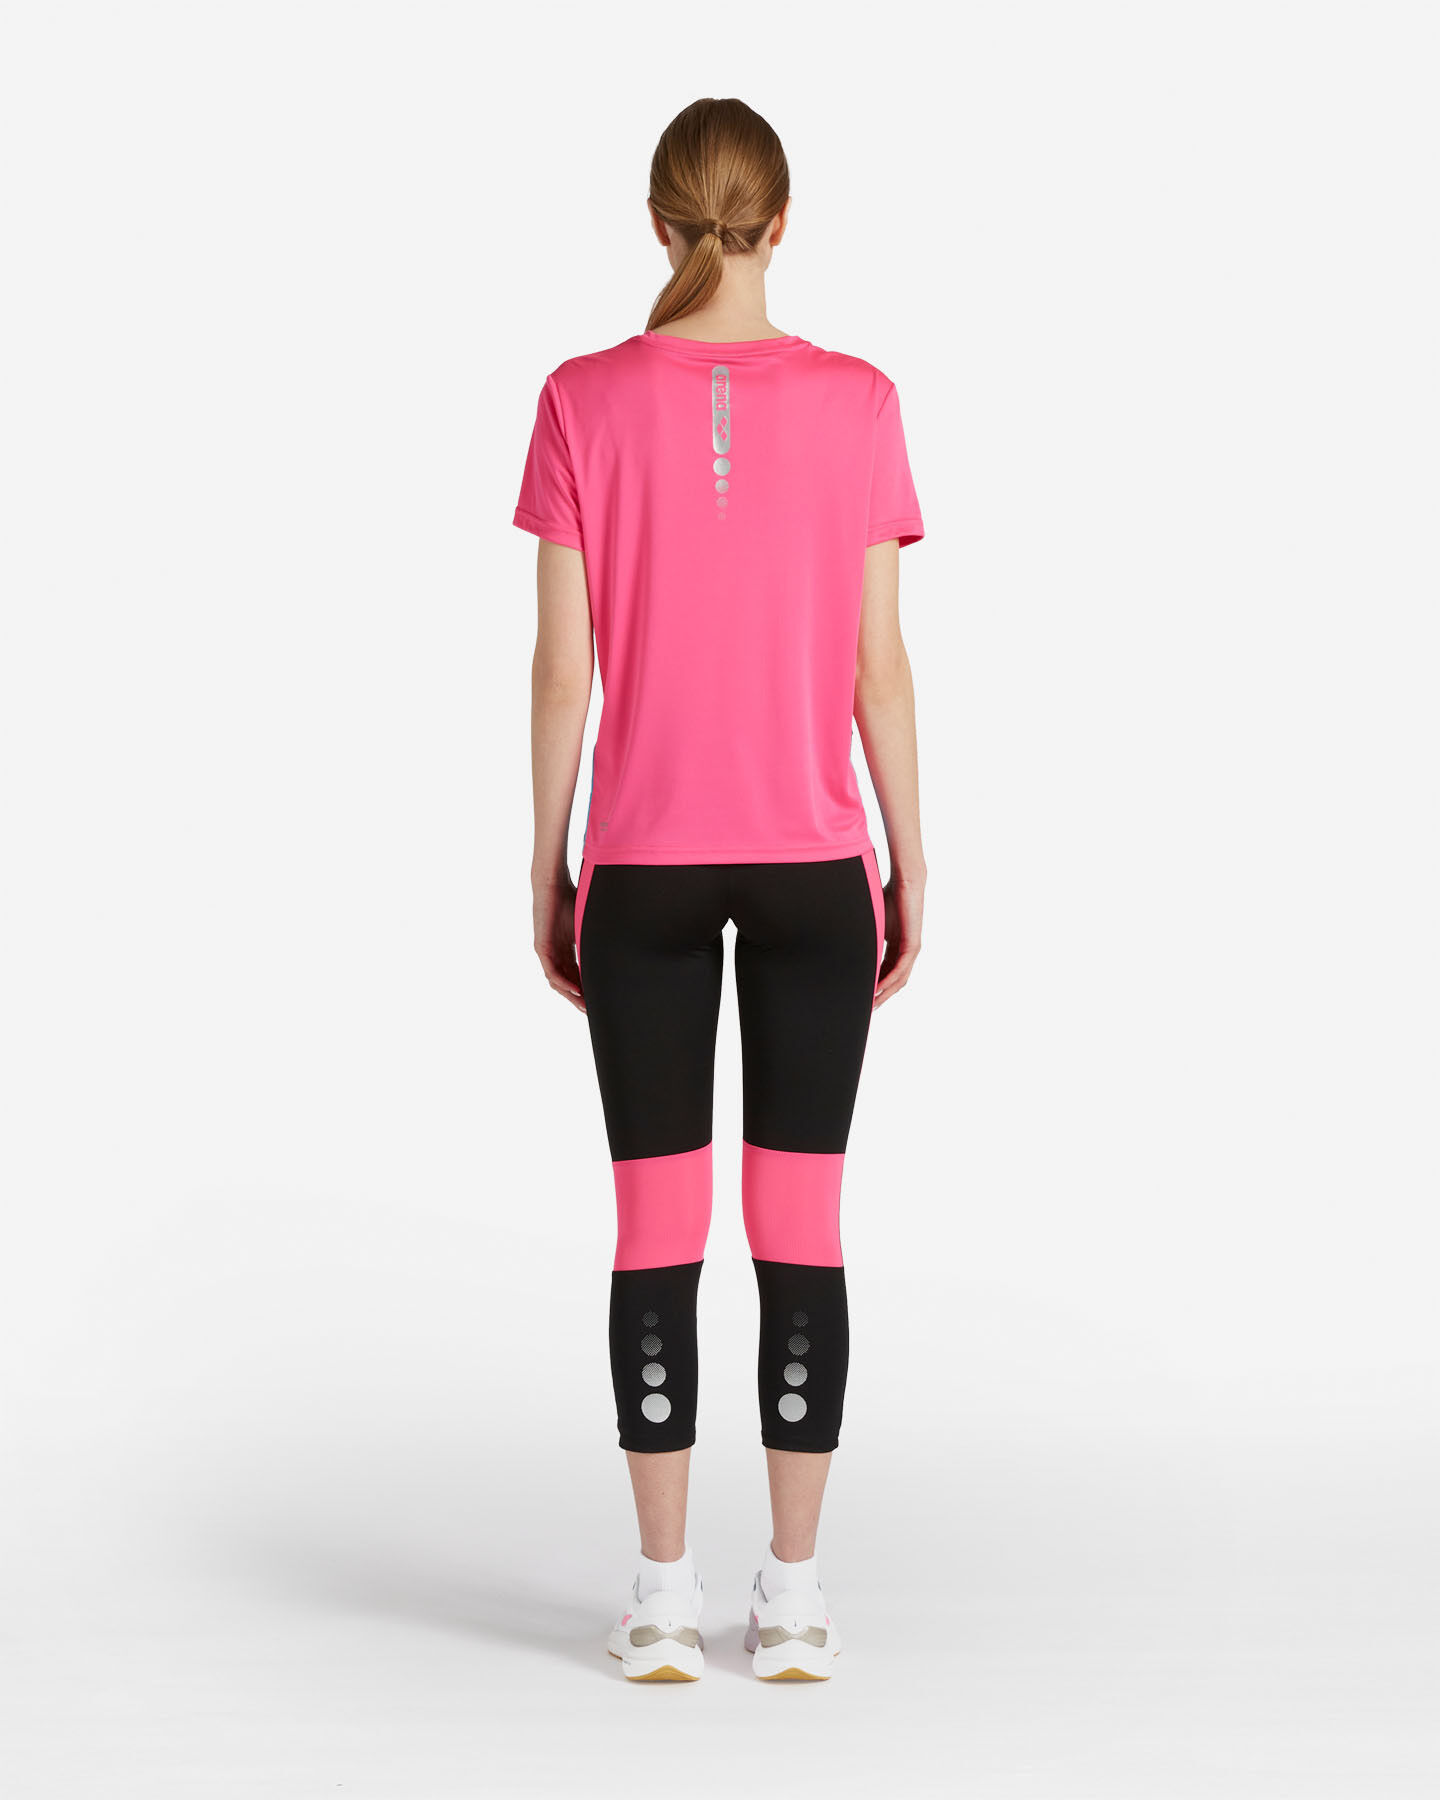  T-Shirt running ARENA FARTLEK W S4131063|1015|XS scatto 2